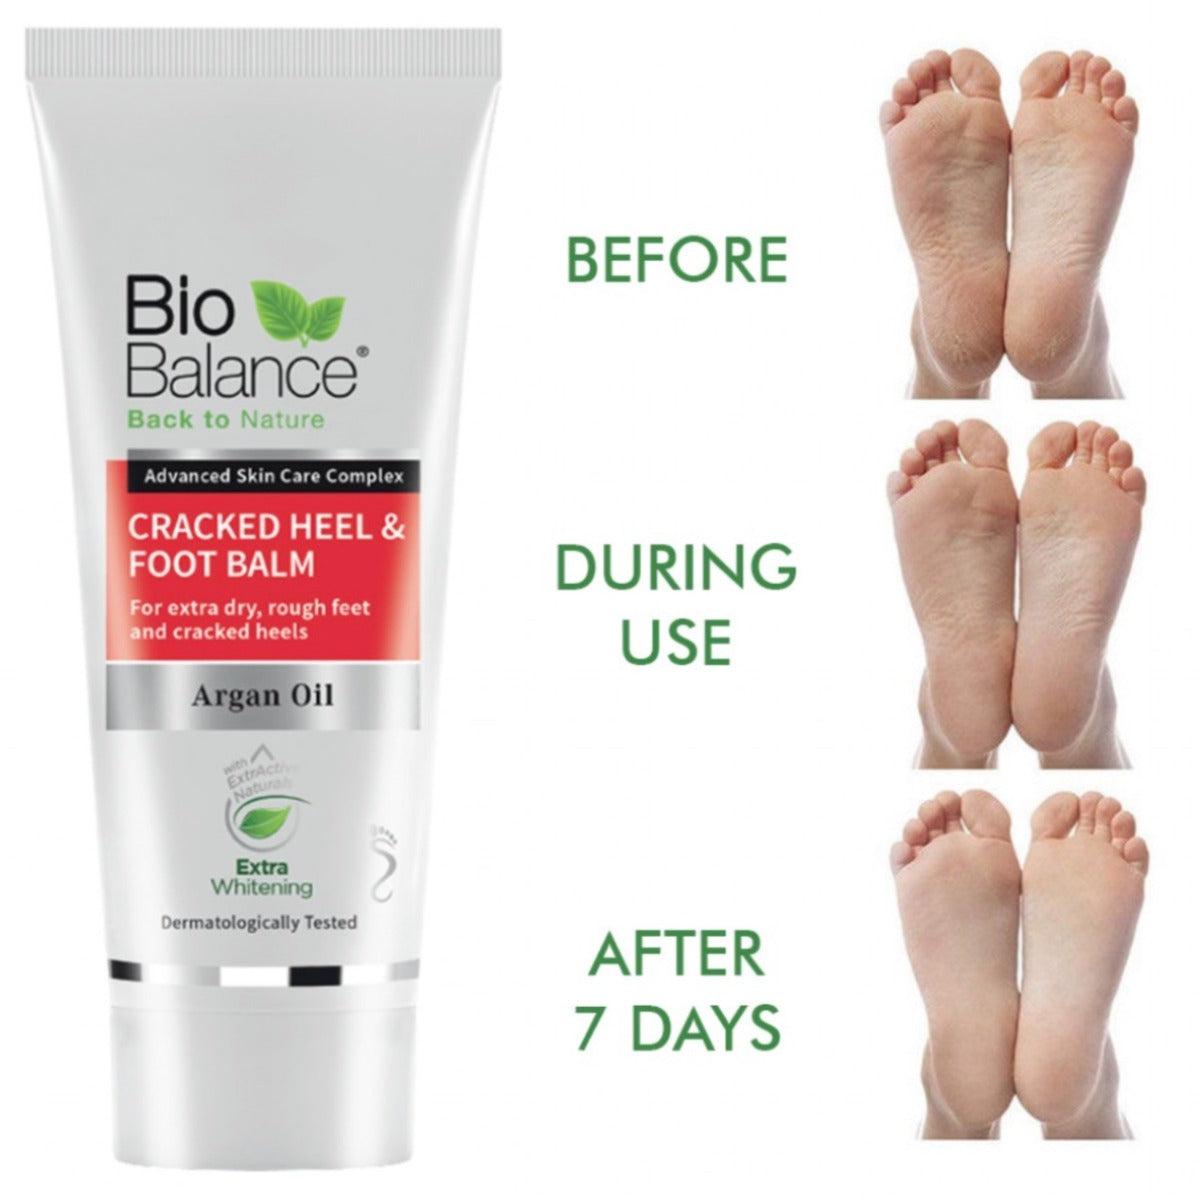 Bio Balance Cracked Heel & Foot Balm with Argan Oil For Extra Dry Rough Feet and Cracked Heels 60ml